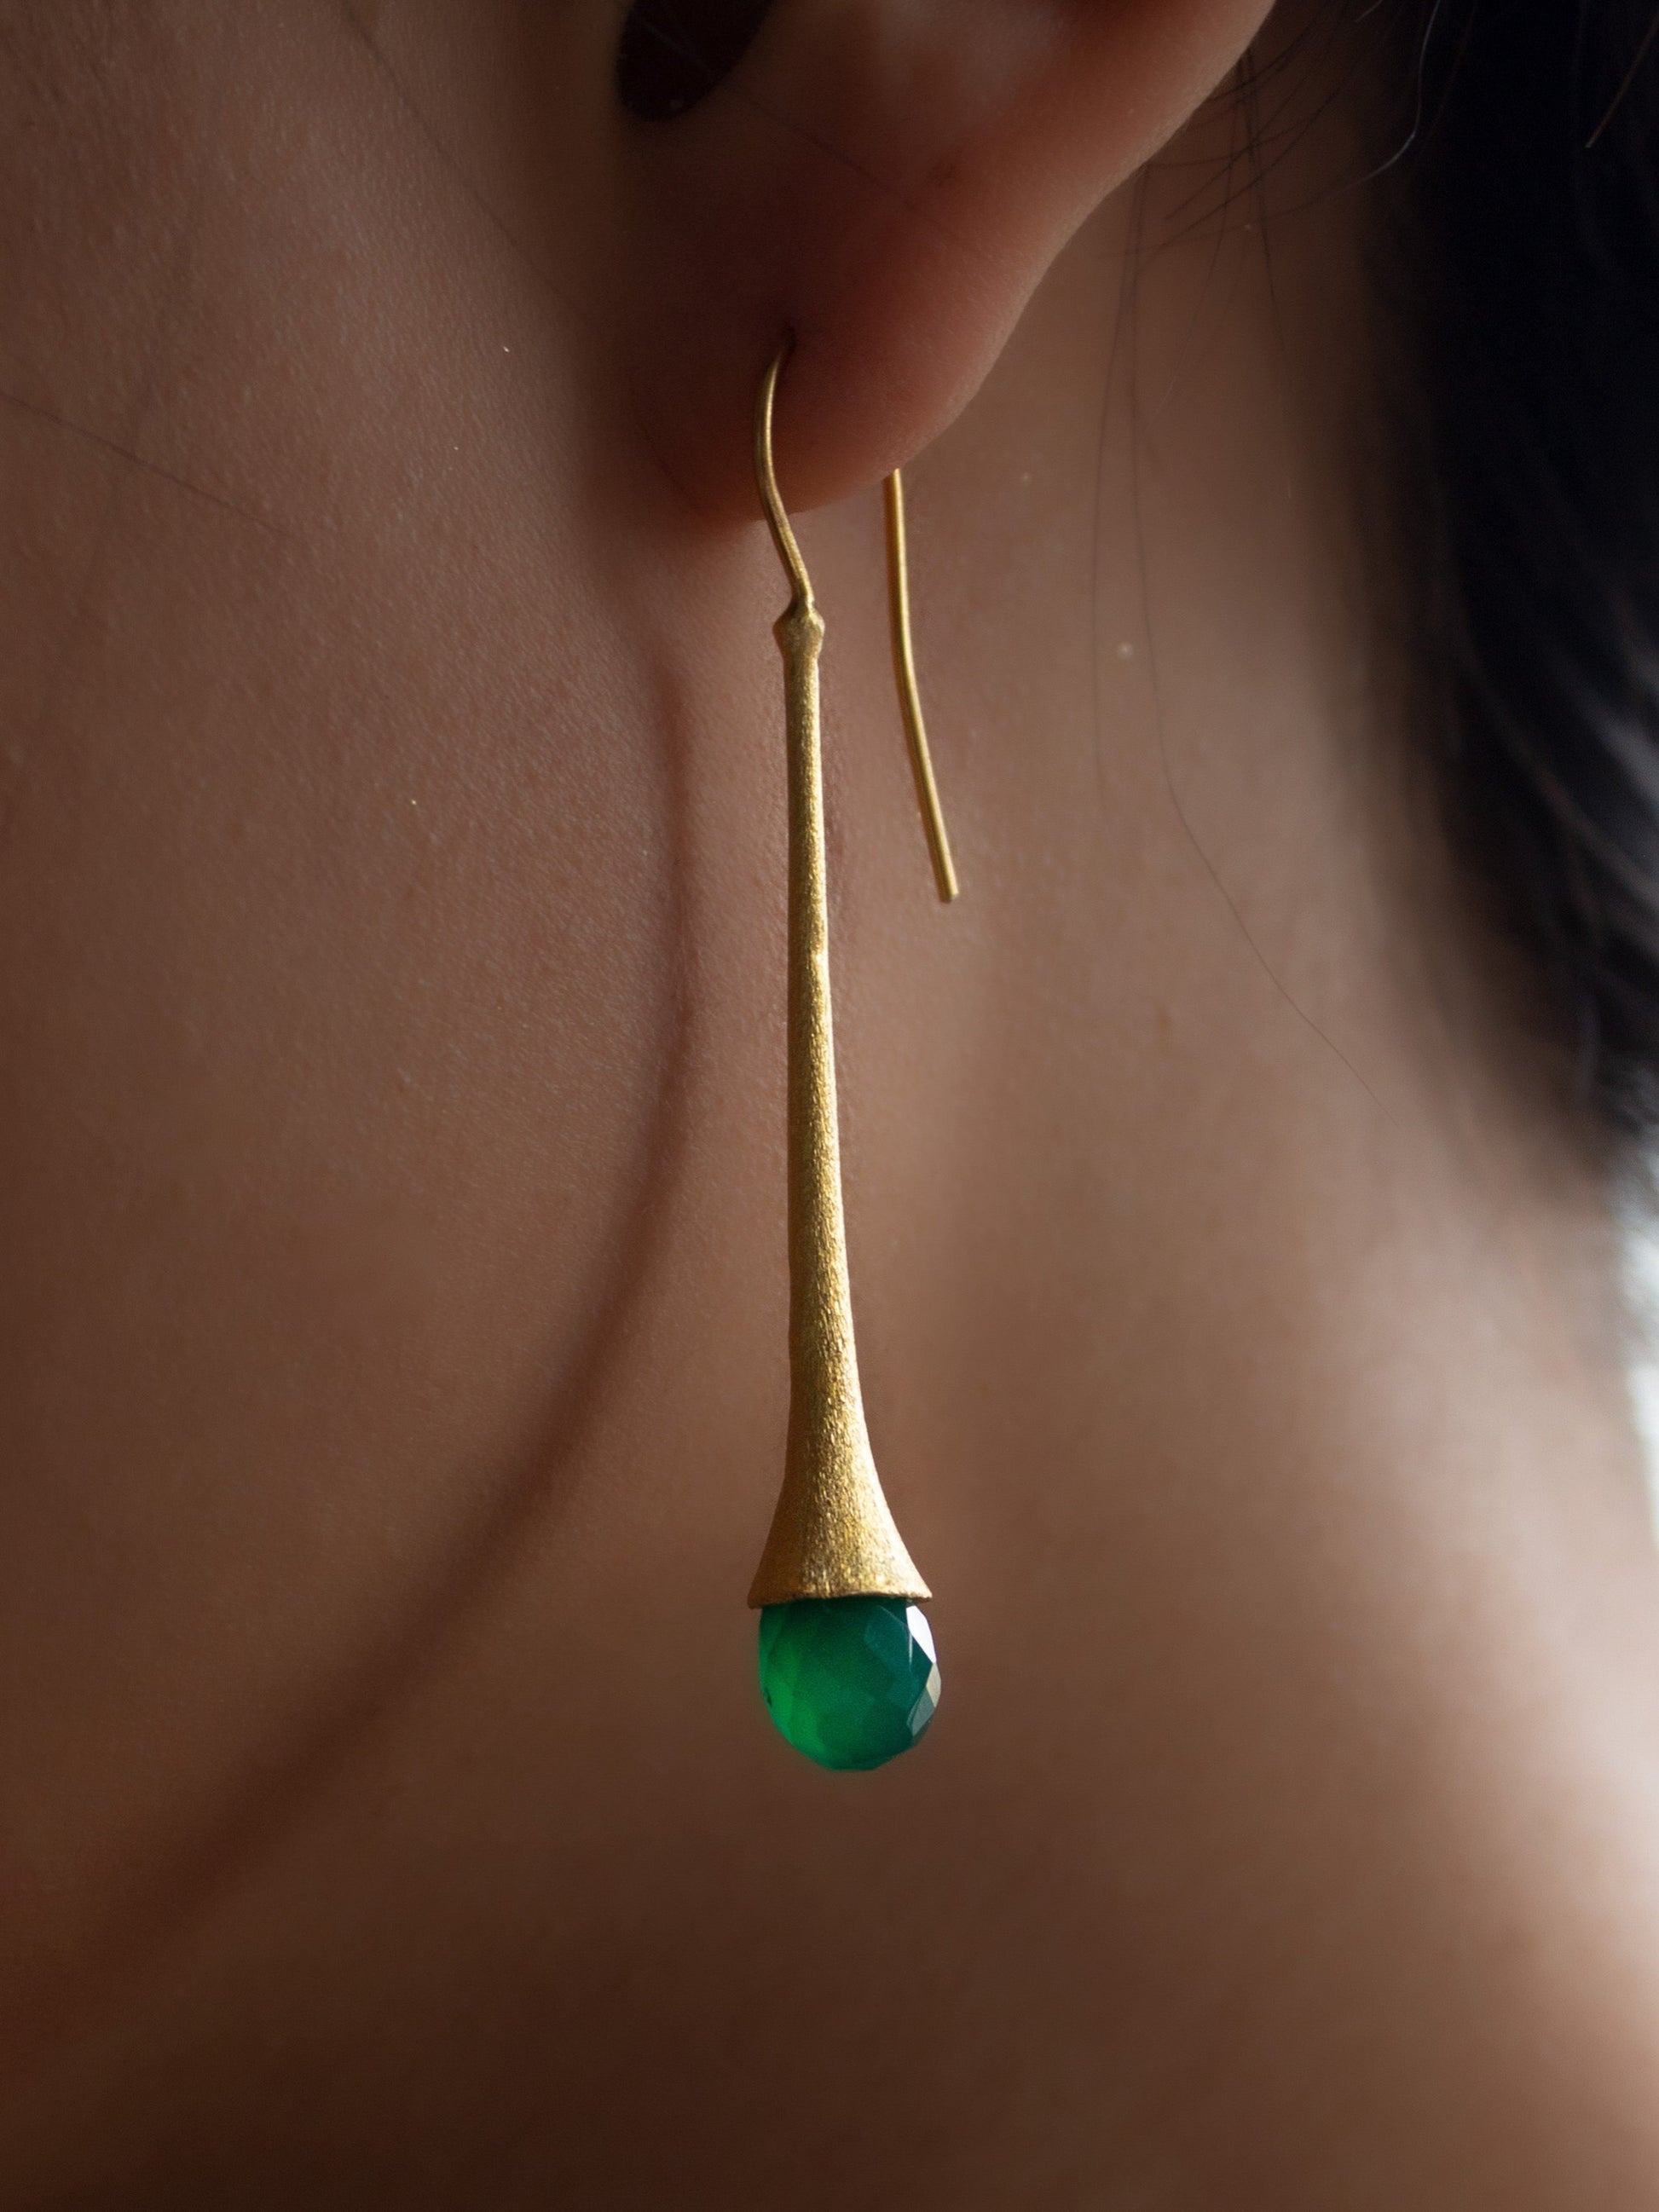 Girl wearing a long and chic gold earring with a briolette cut jade gemstone